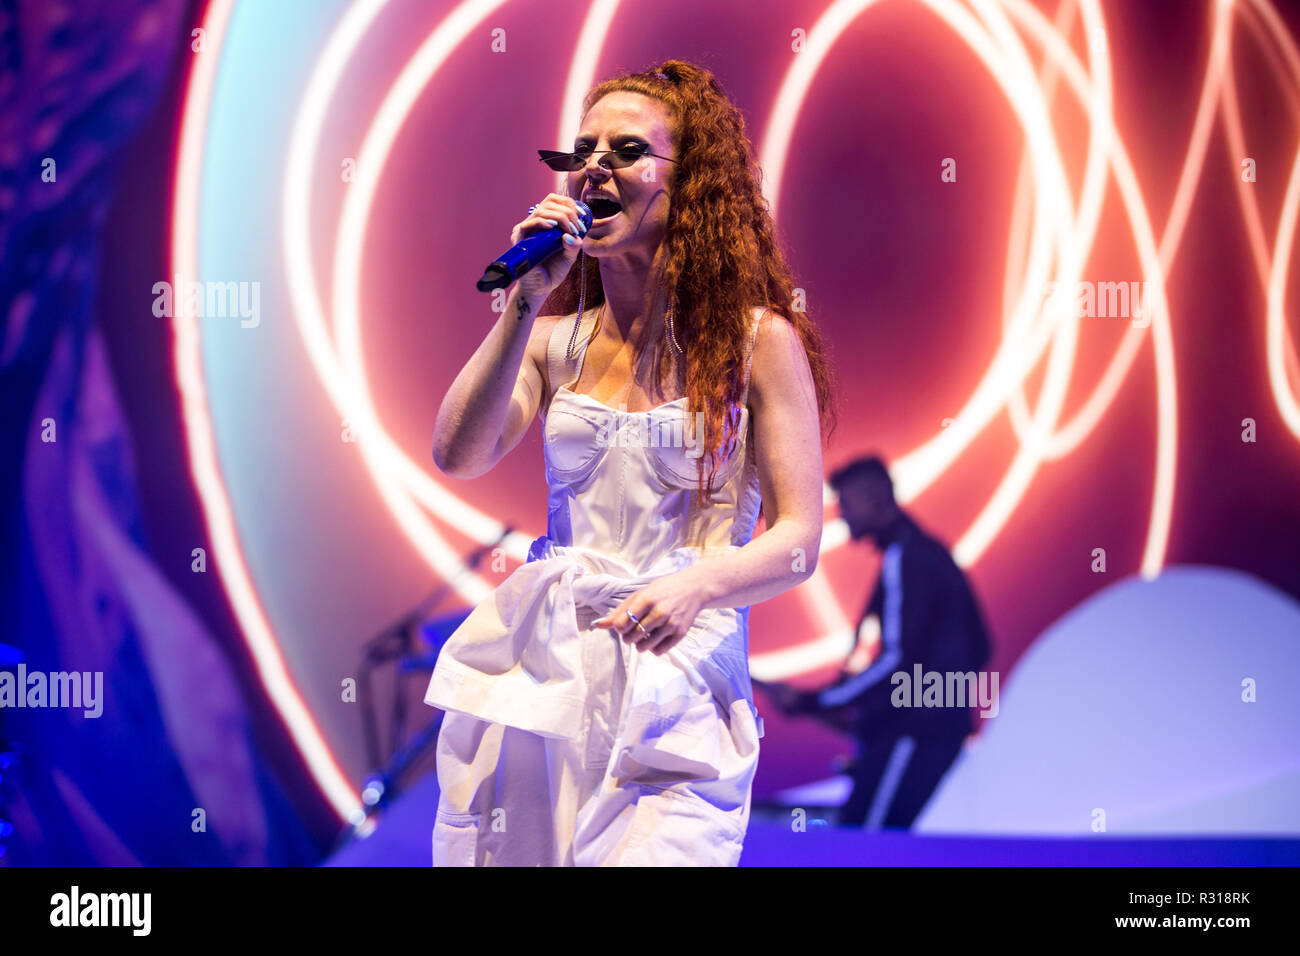 London, UK. 20th October, 2018. Jess Glynne performing at the The 02 London on the 20th November 2018 - Always In Between UK Tour Credit: Tom Rose/Alamy Live News Credit: Tom Rose/Alamy Live News Stock Photo